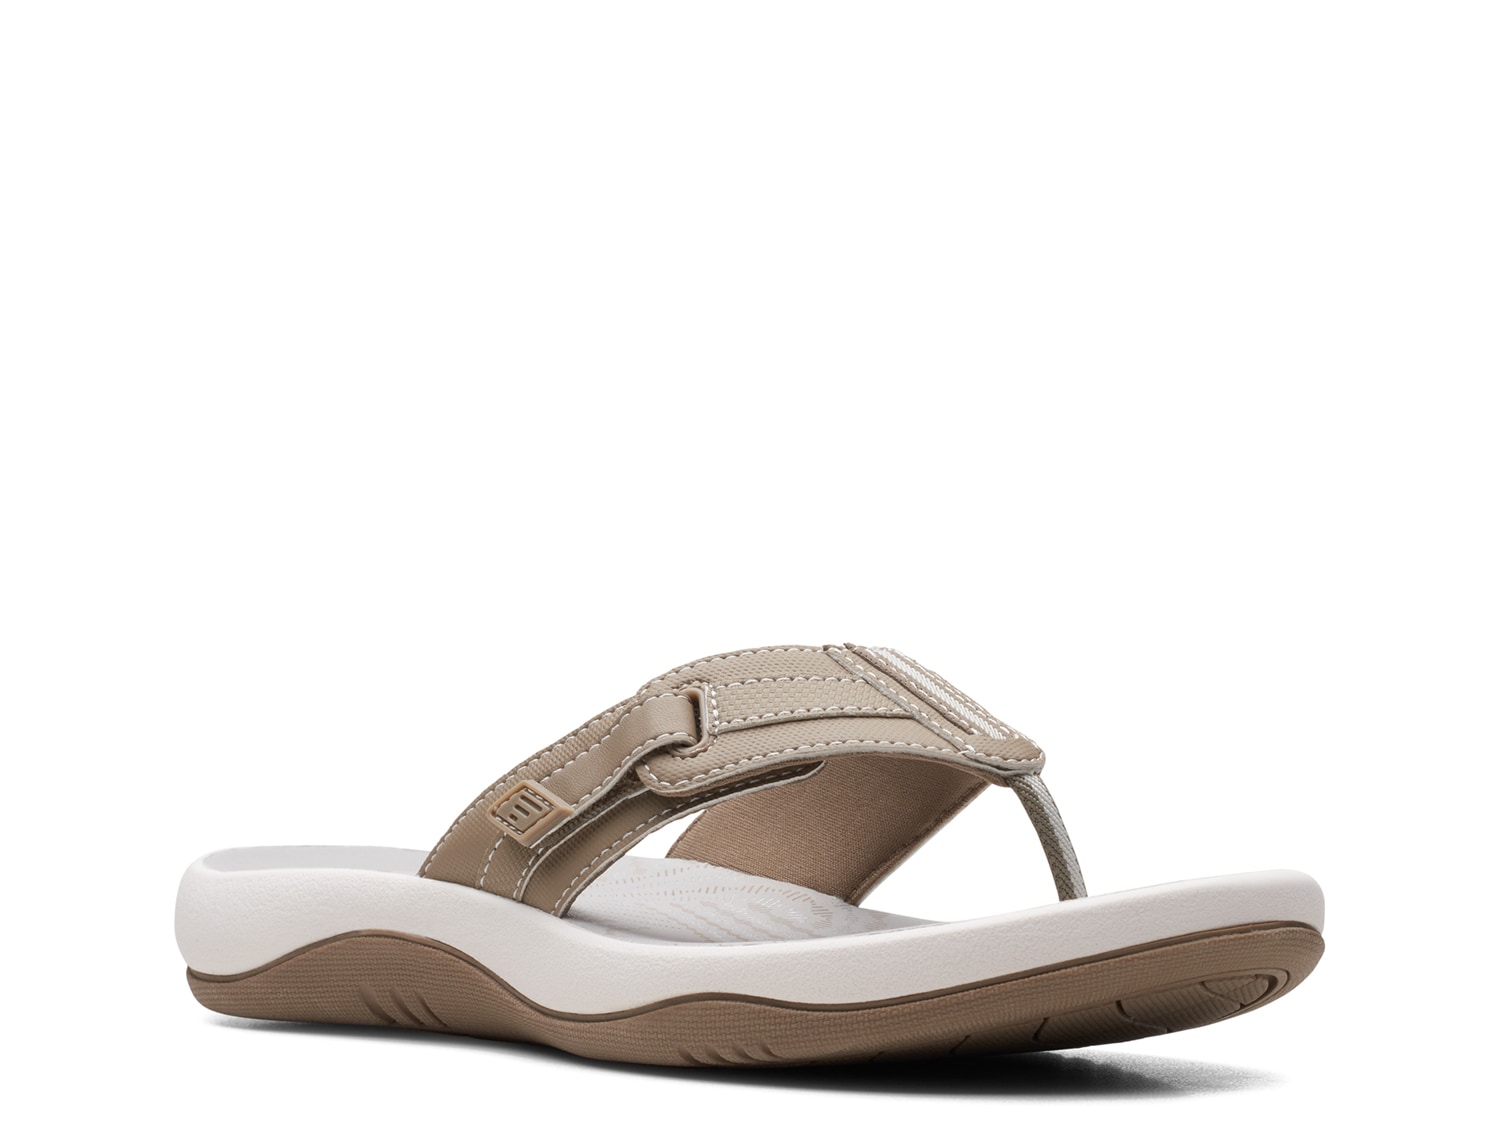 Cloudsteppers by Clarks Sandals | DSW